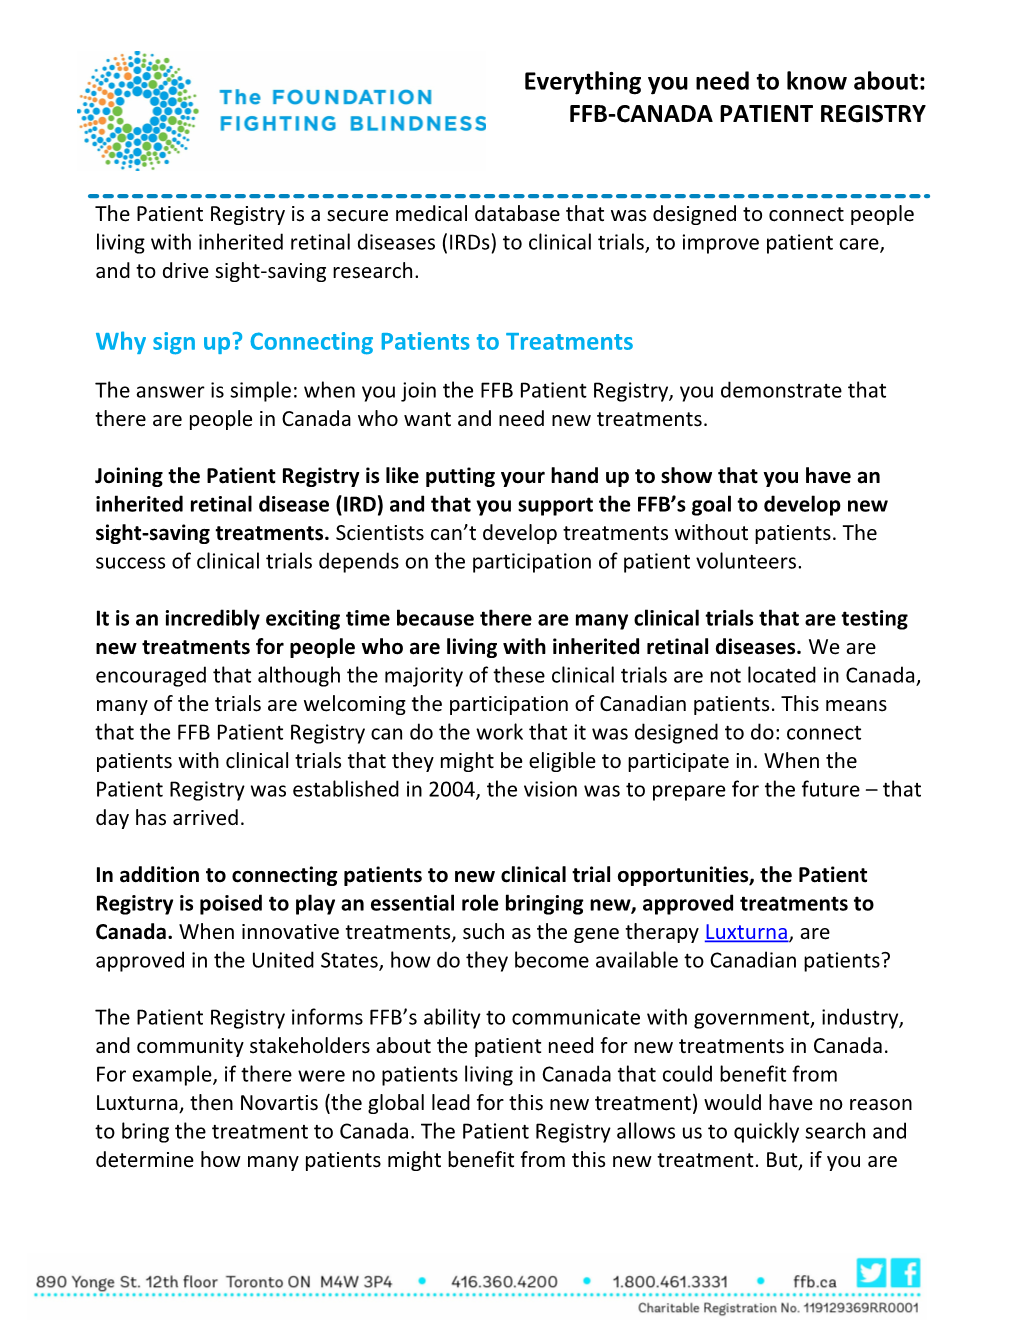 Why Sign Up? Connecting Patients to Treatments